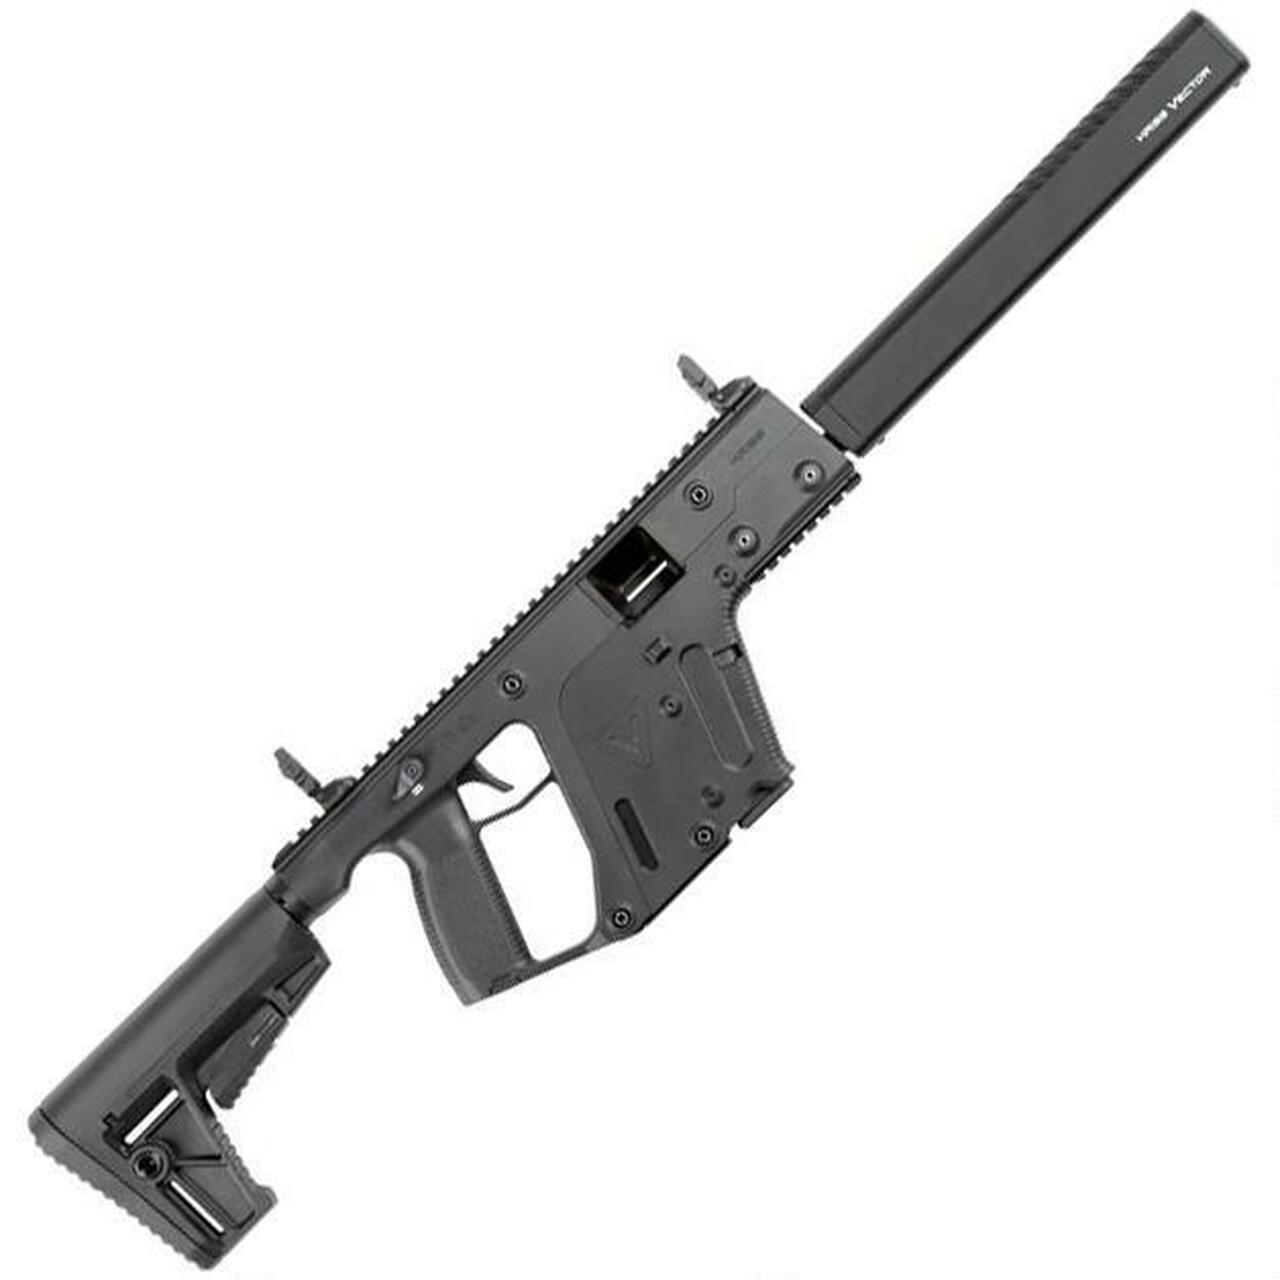 Image of Kriss Vector CRB G2 Rifle, 45 ACP, 16", 13rd, M4 Collapsible Stock